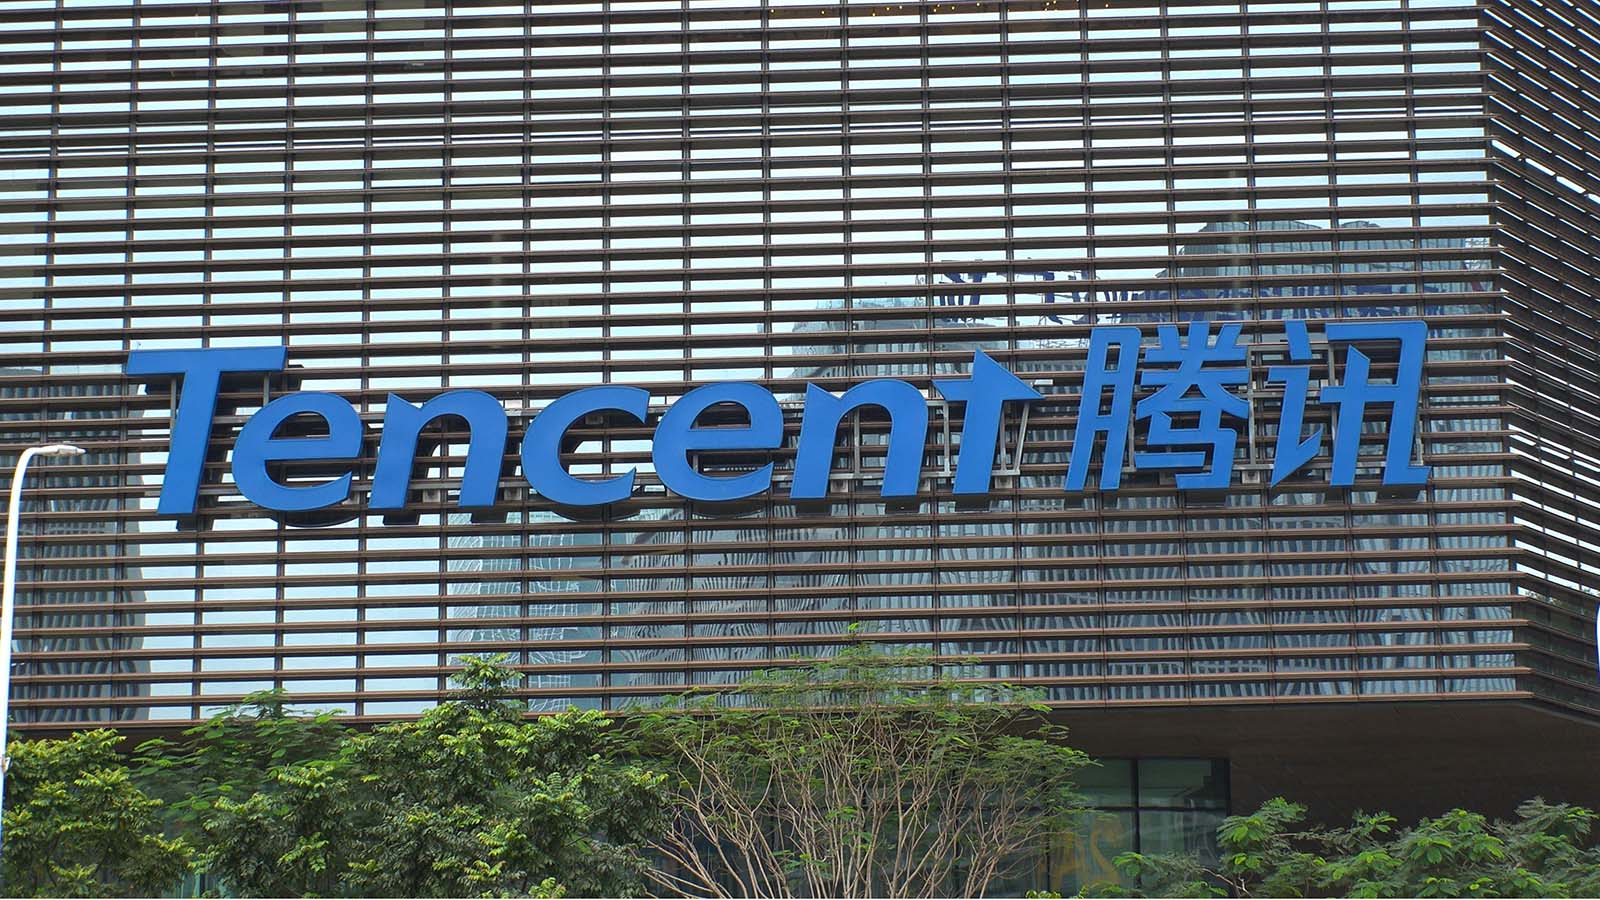 Tencent (TCEHY) sign on Tencent headquarters in Shenzhen, China.